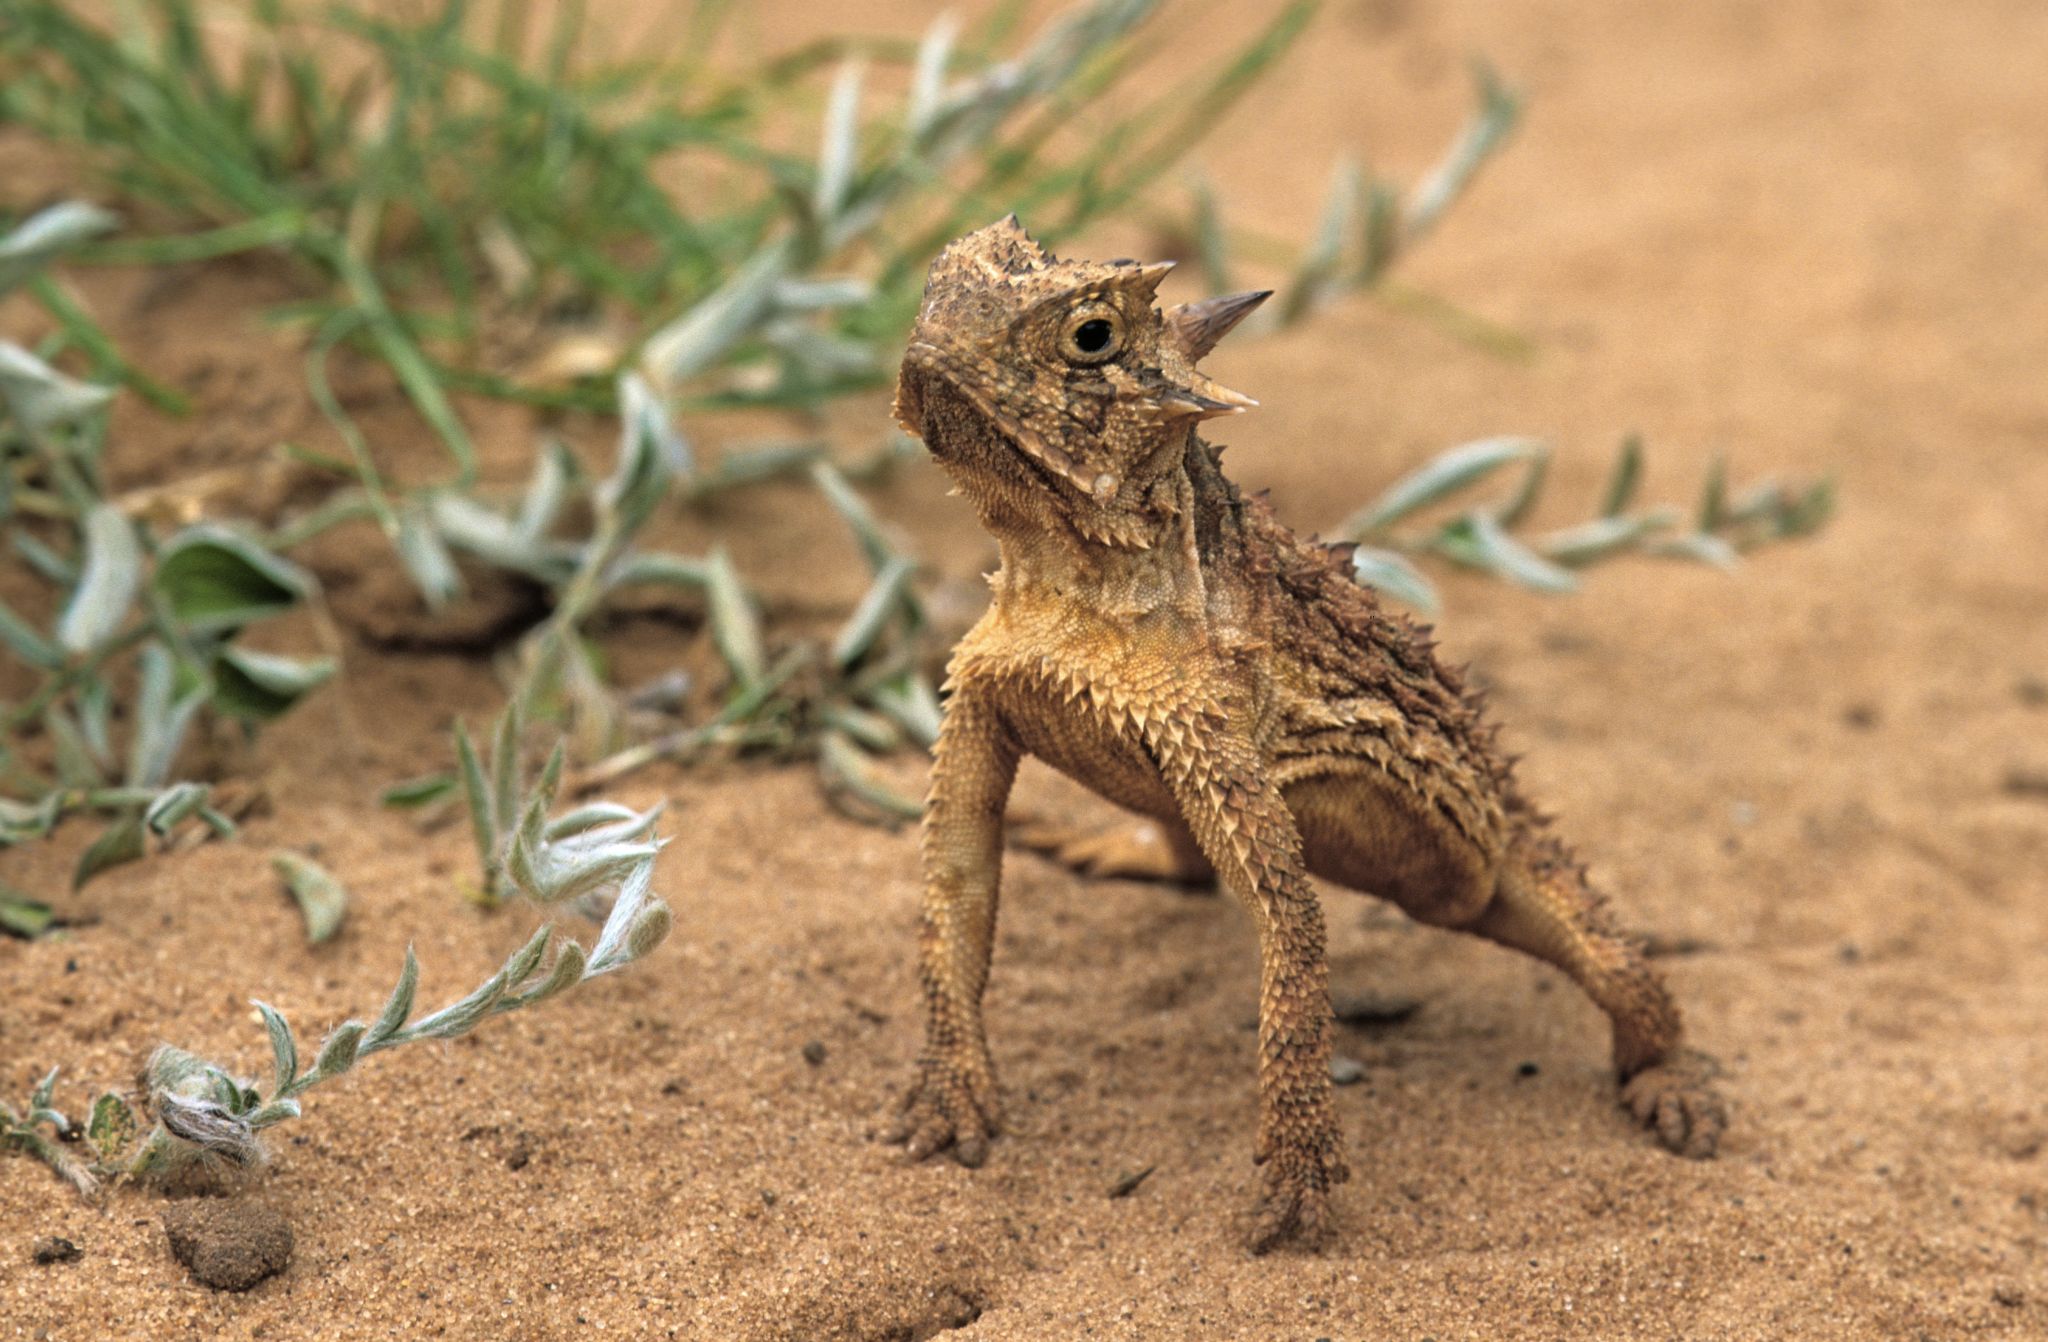 Threatened Species Horny Toad Reaches New Milestone In Texas